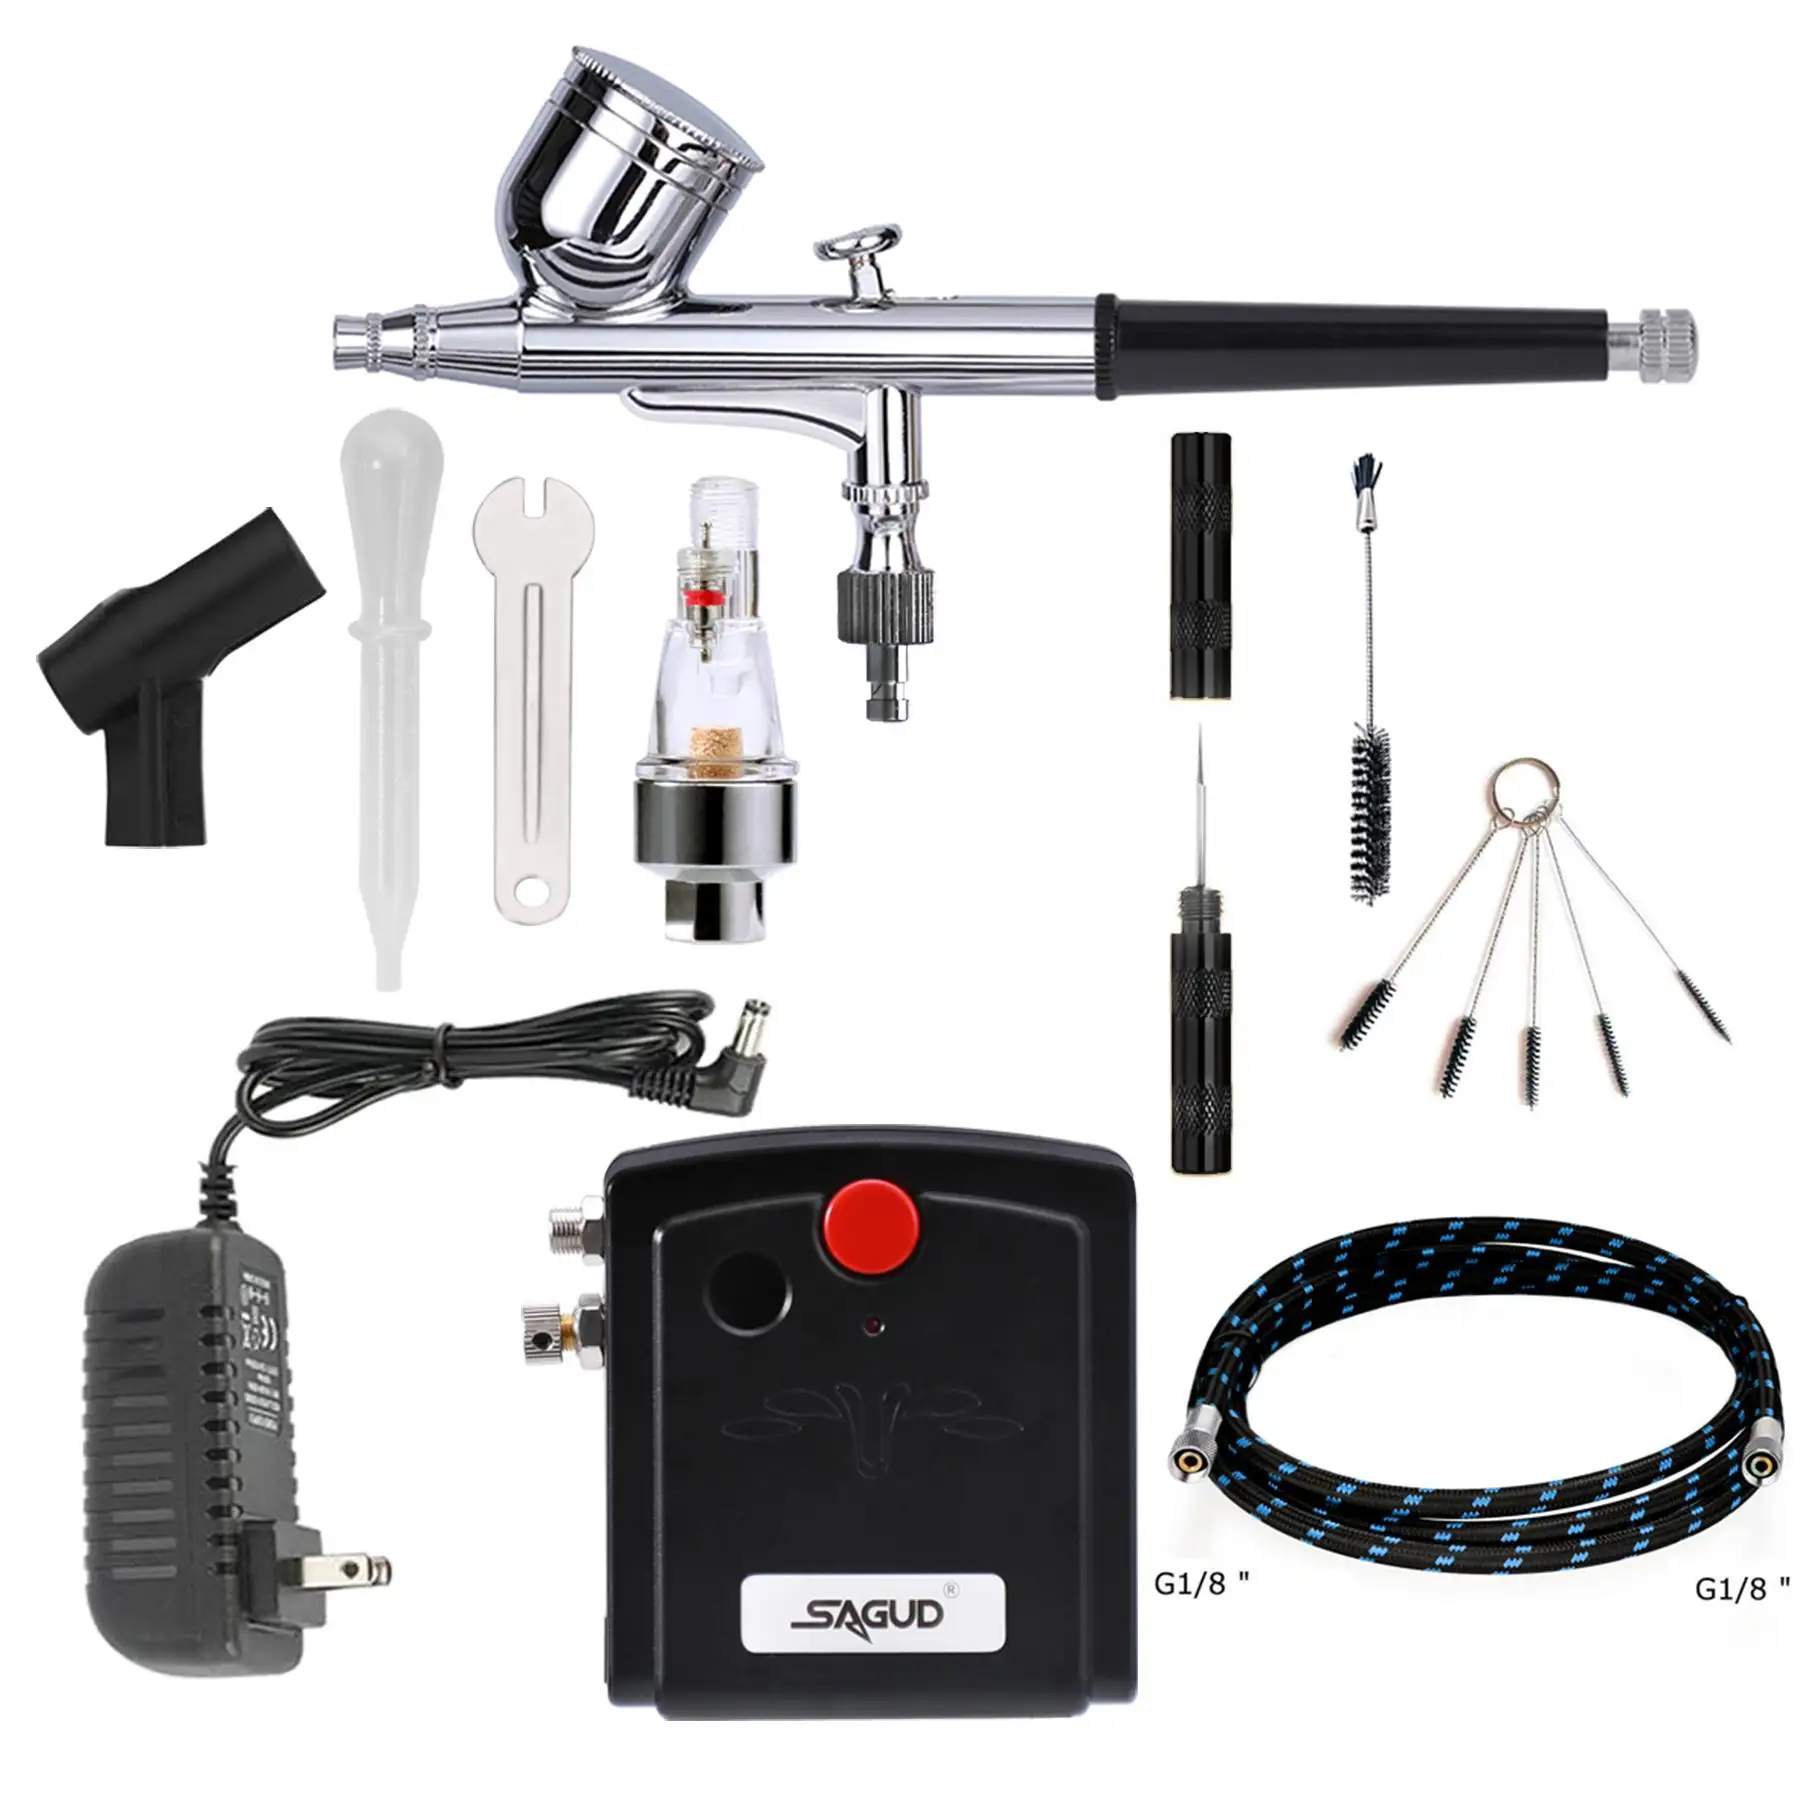 Dual-Action Airbrush with Auto Shut Airbrush Compressor Kit for Cake Decor Tattoo Nail Makeup with Spray Gun Cleaning Tool Set